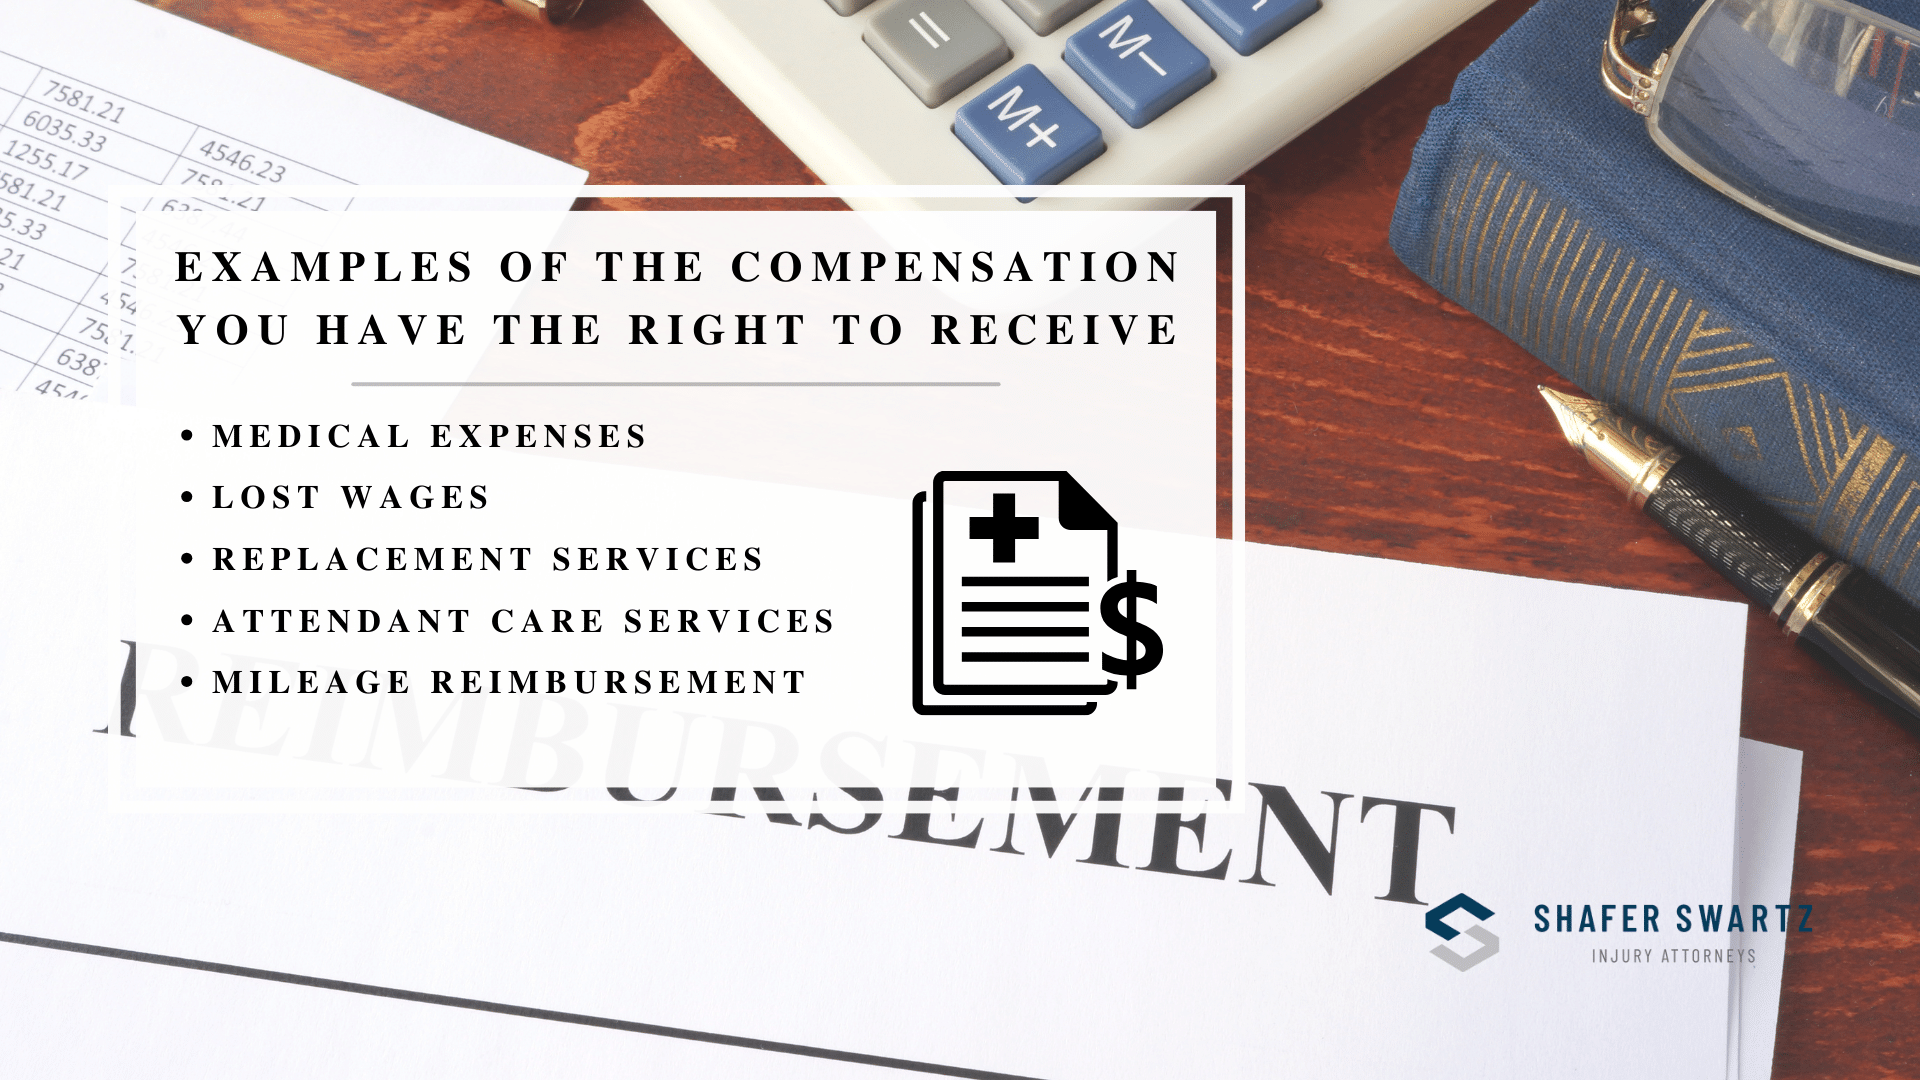 Infographic image of Examples of the compensation you have the right to receive